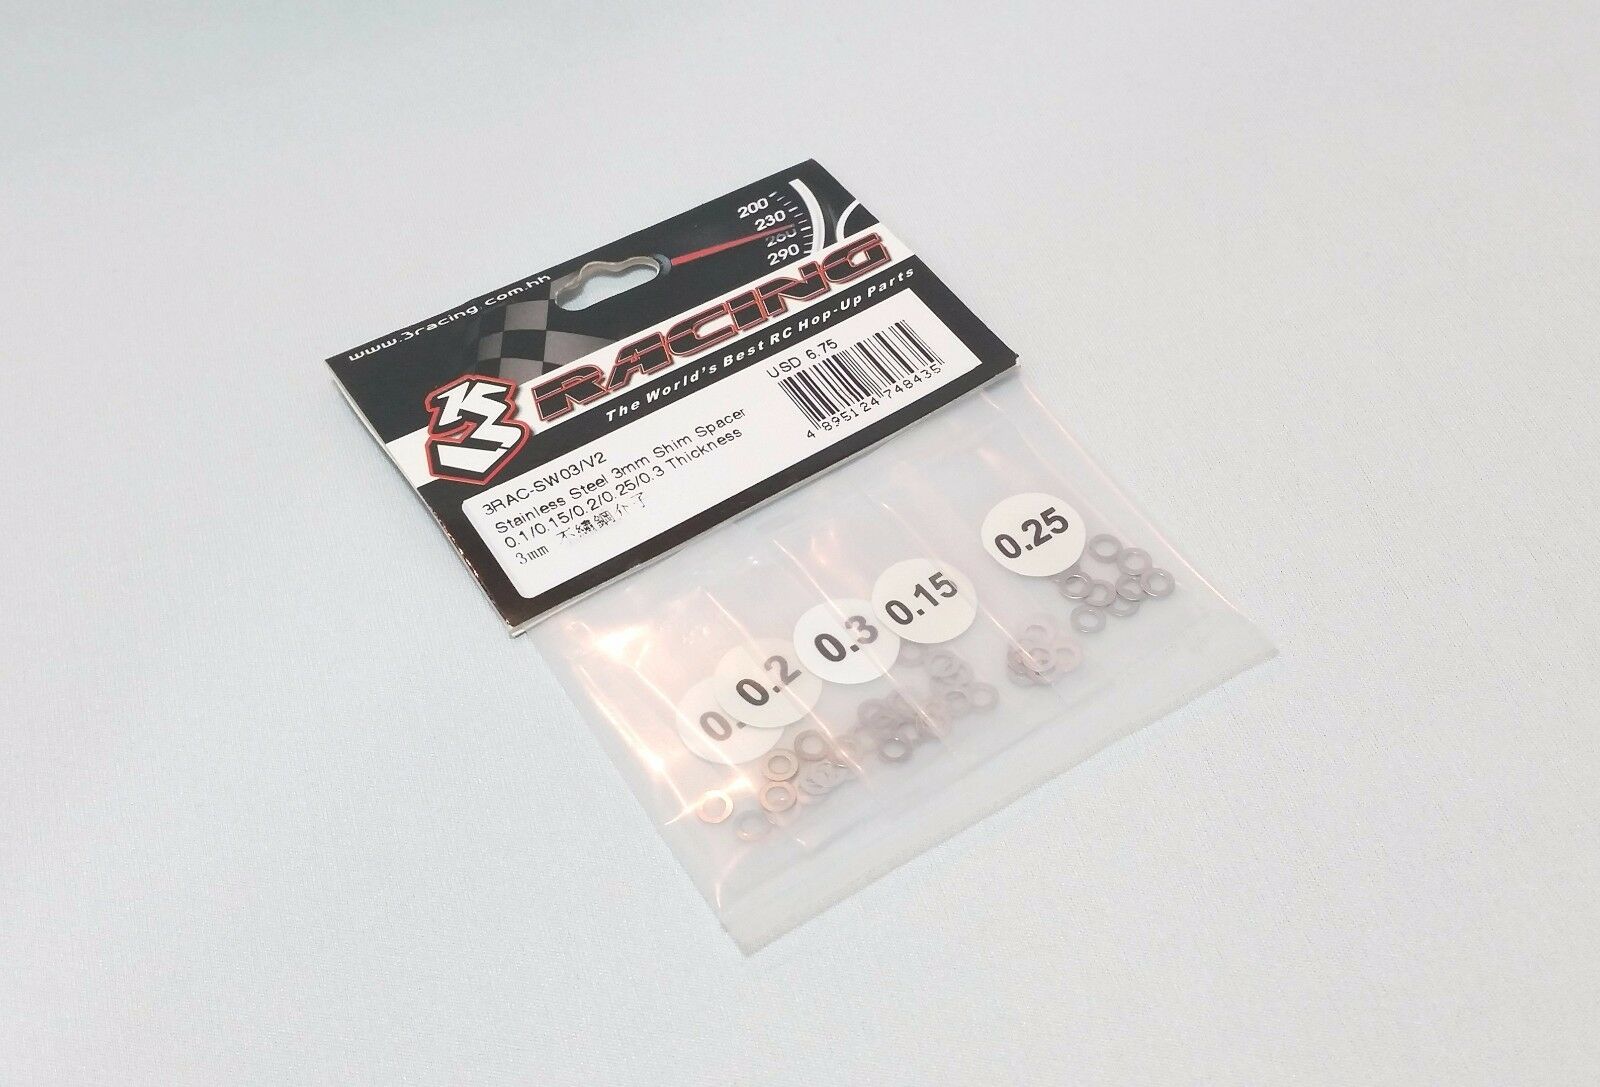 3racing Stainless Steel 3,4,5,6,7,8,10,12mm Shim Spacers #3rac-sw Traxxas Axial